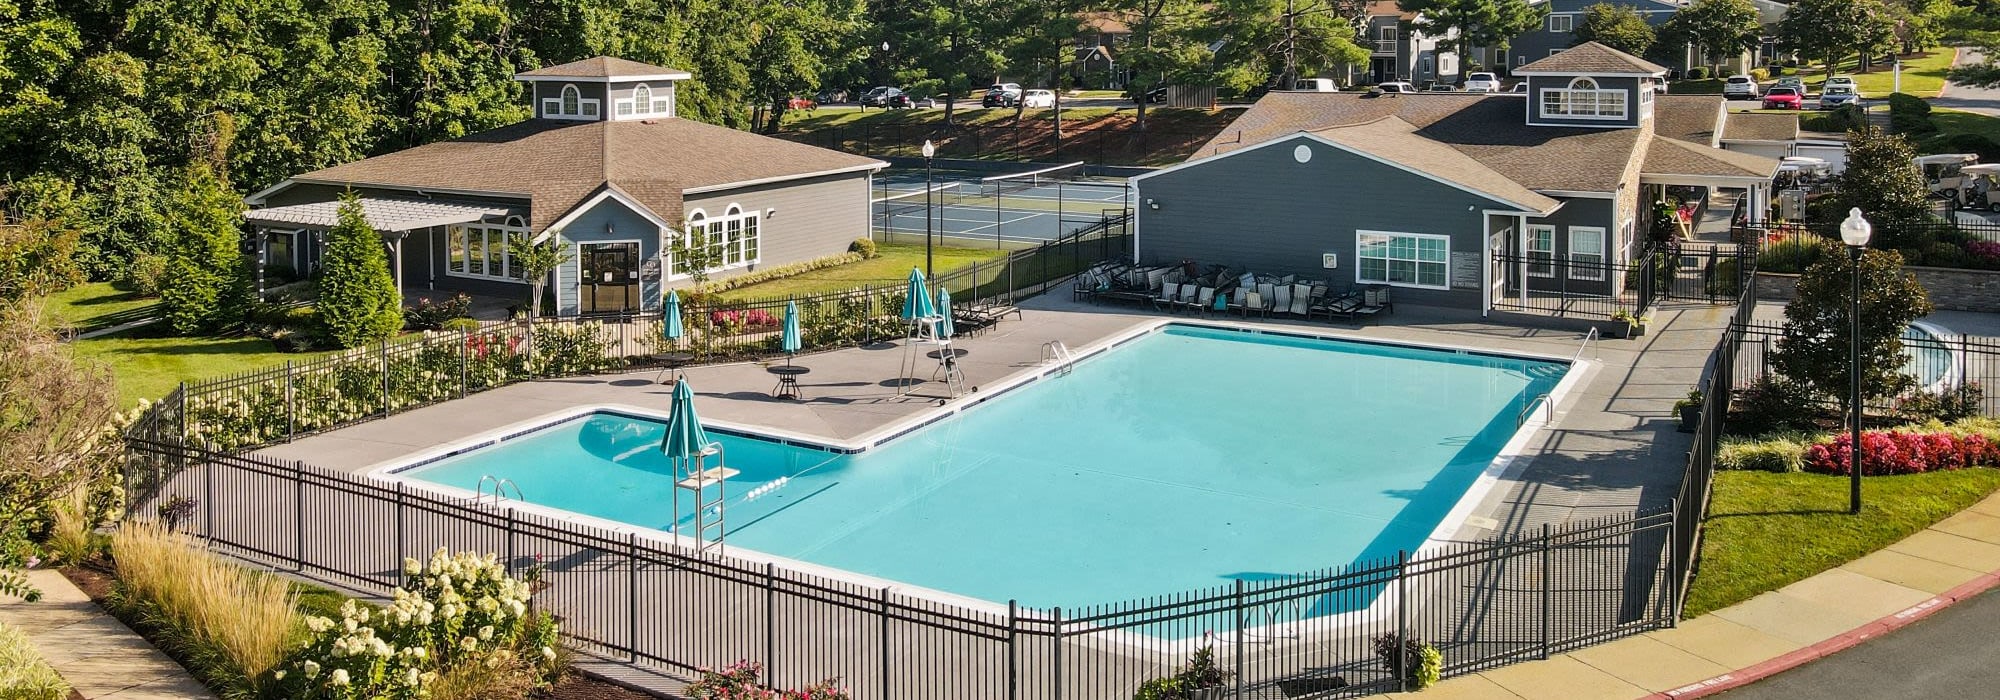 Amenities at The Seasons Apartments in Laurel, Maryland